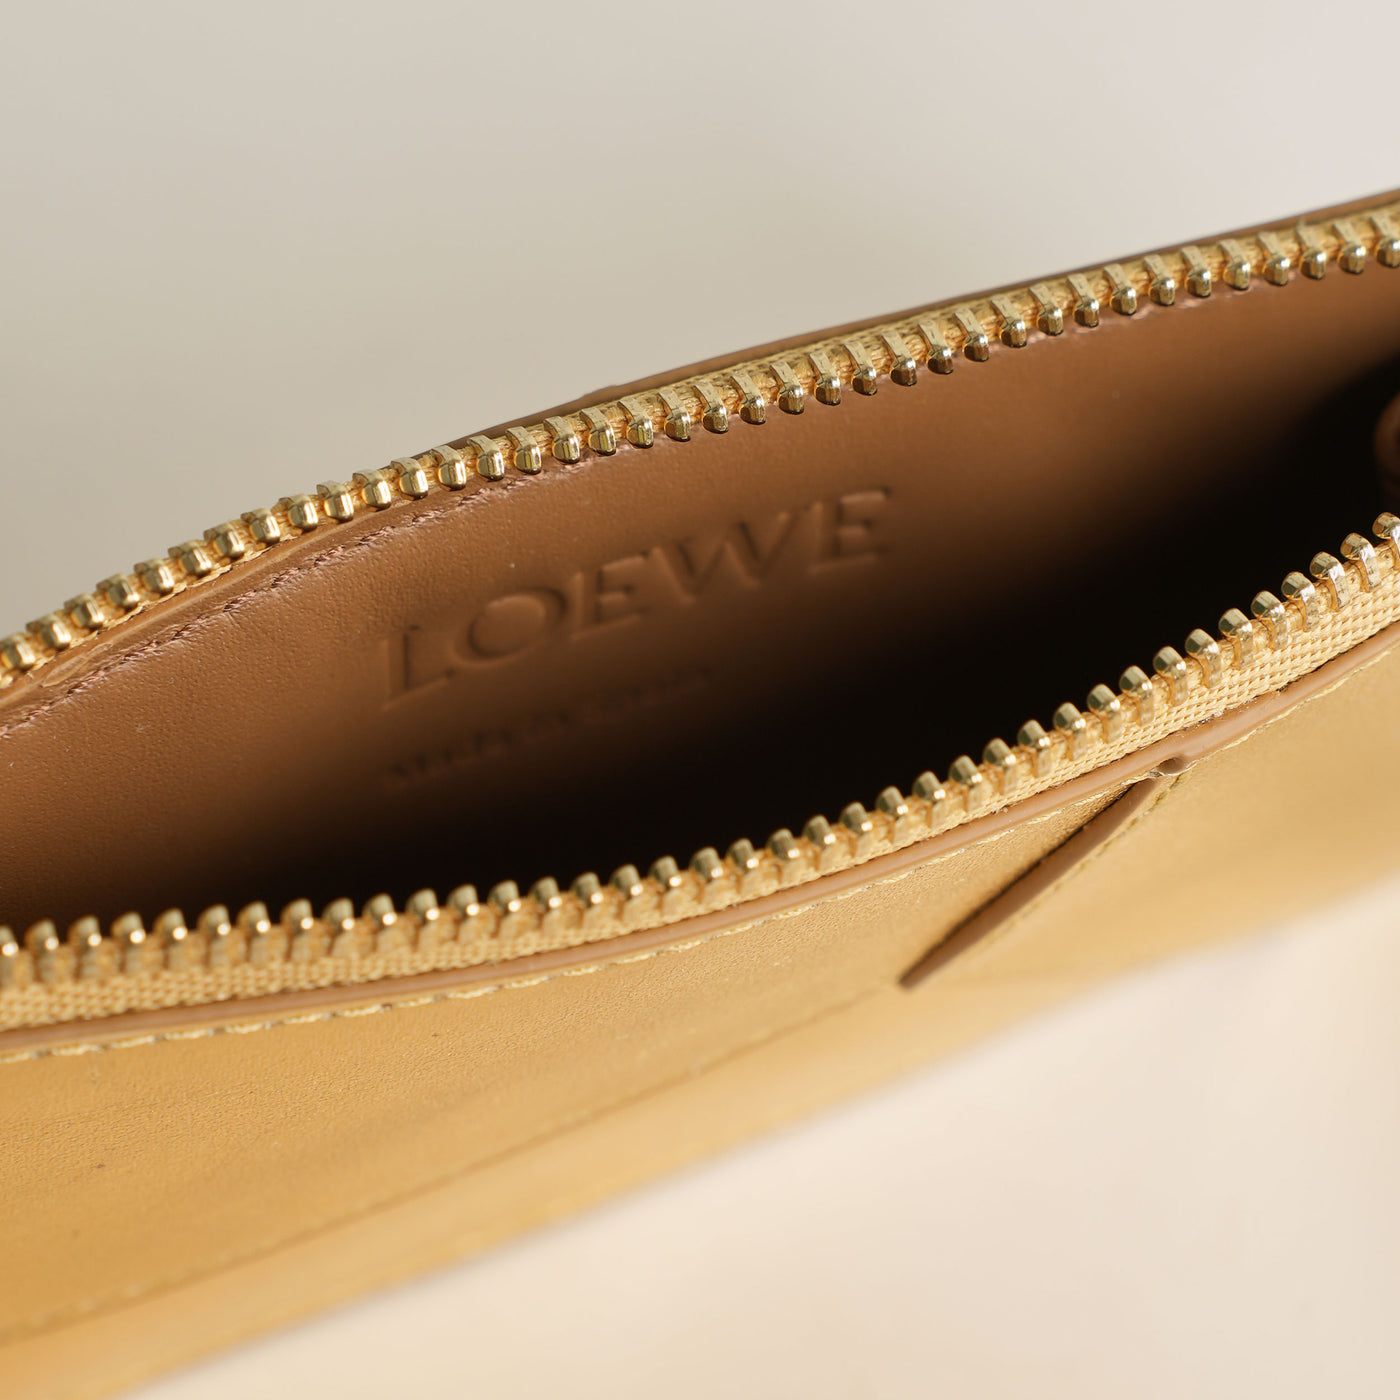 LOEWE gold puzzle coin leather cardholder with zipper